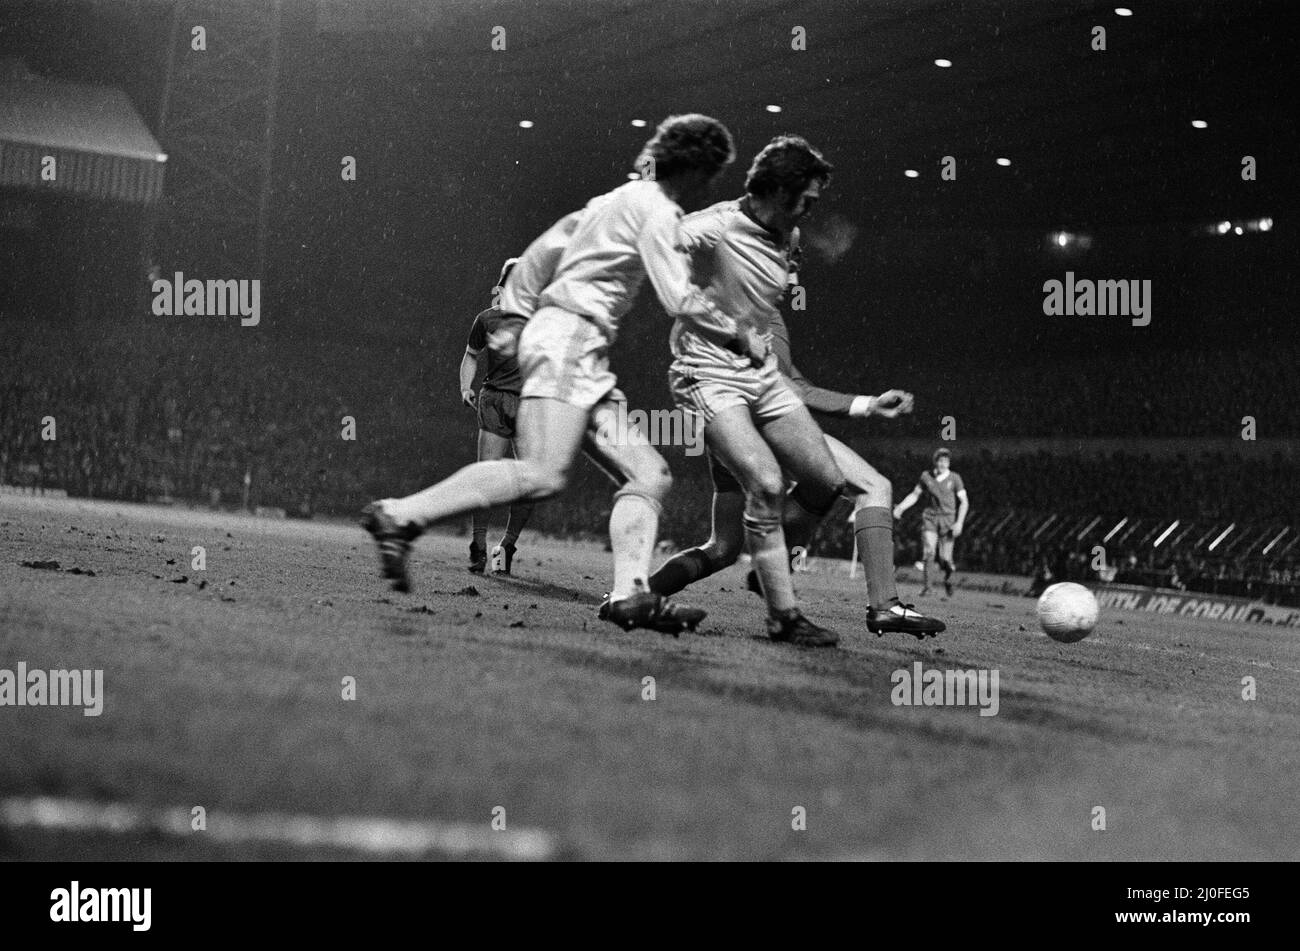 The 1978 Football League Cup Final was the eighteenth League Cup final, and was contested between Liverpool and Nottingham Forest. The initial match resulted in a 0?0 draw at Wembley Stadium on 18 March 1978. The replay was four days later at Old Trafford, and saw John Robertson score from the penalty spot after a foul by Phil Thompson on John O'Hare, which TV replays confirmed was actually outside the penalty area.(Picture) players contesting the ball. 22nd March 1978 Stock Photo